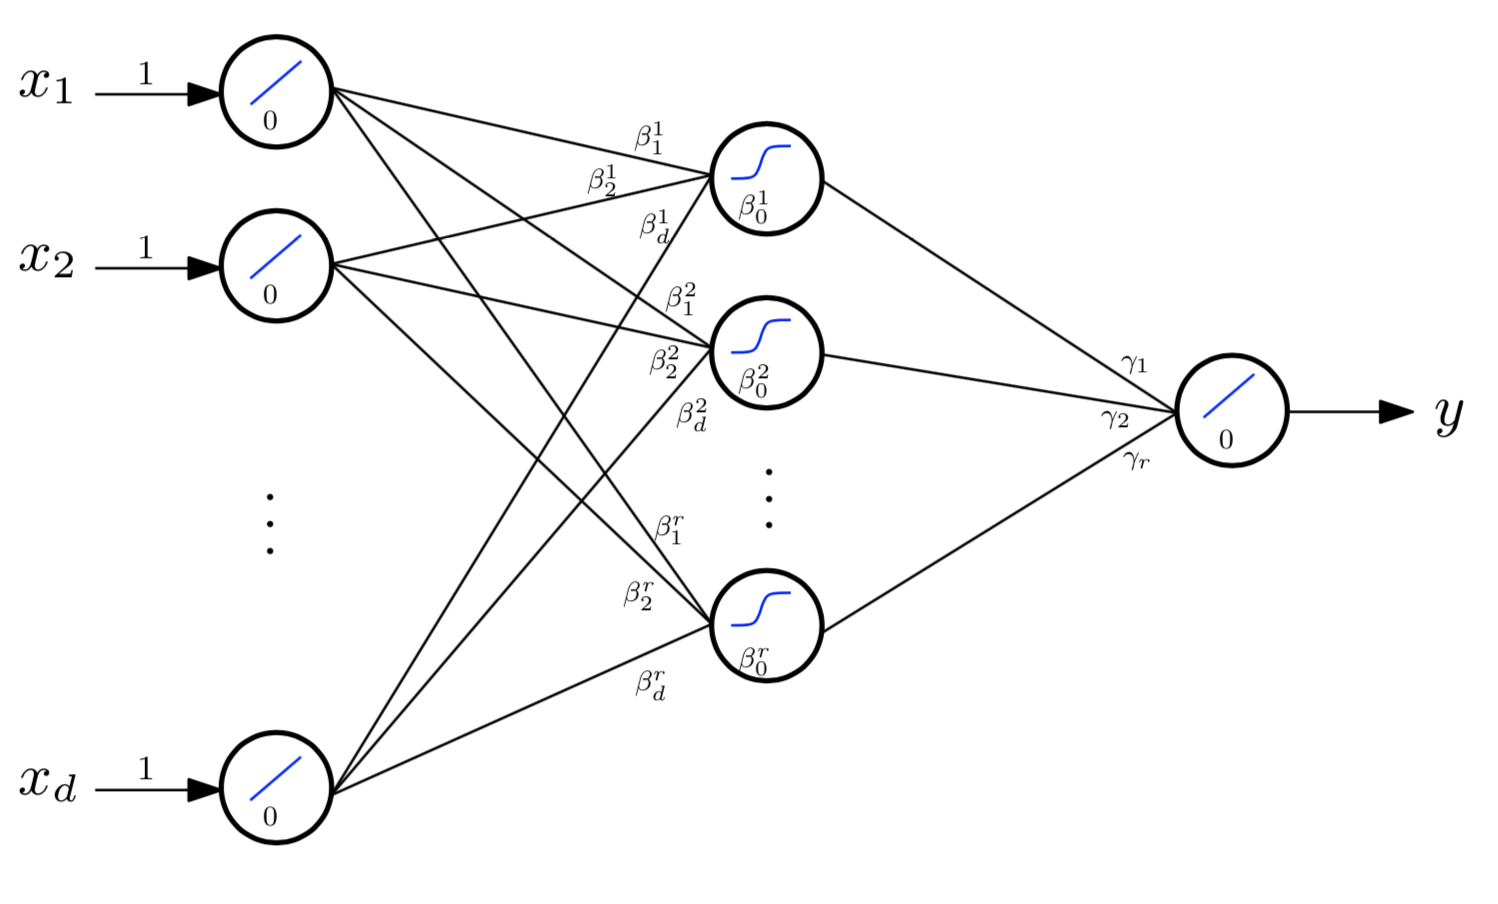 Figure 4. A 1-layer perceptron (page 205 of the lecture). Note that we will not implement the inputs as neurons but directly as nodes in order to avoid creating unnecessary objects.